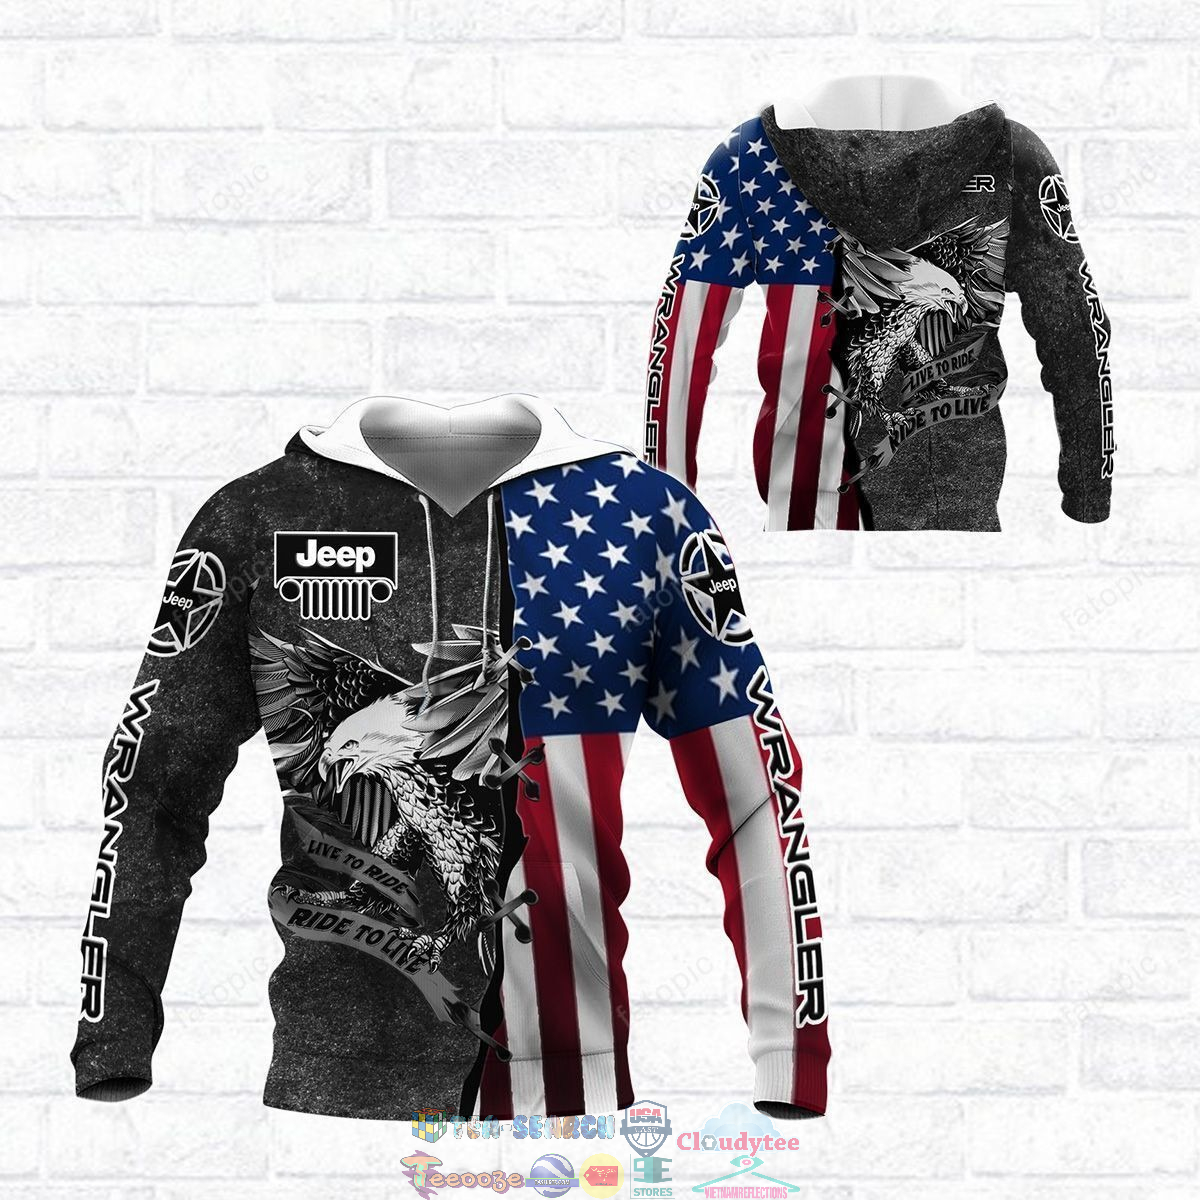 zqJl3BkD-TH050822-15xxxJeep-Wrangler-Eagle-American-Flag-ver-1-3D-hoodie-and-t-shirt3.jpg